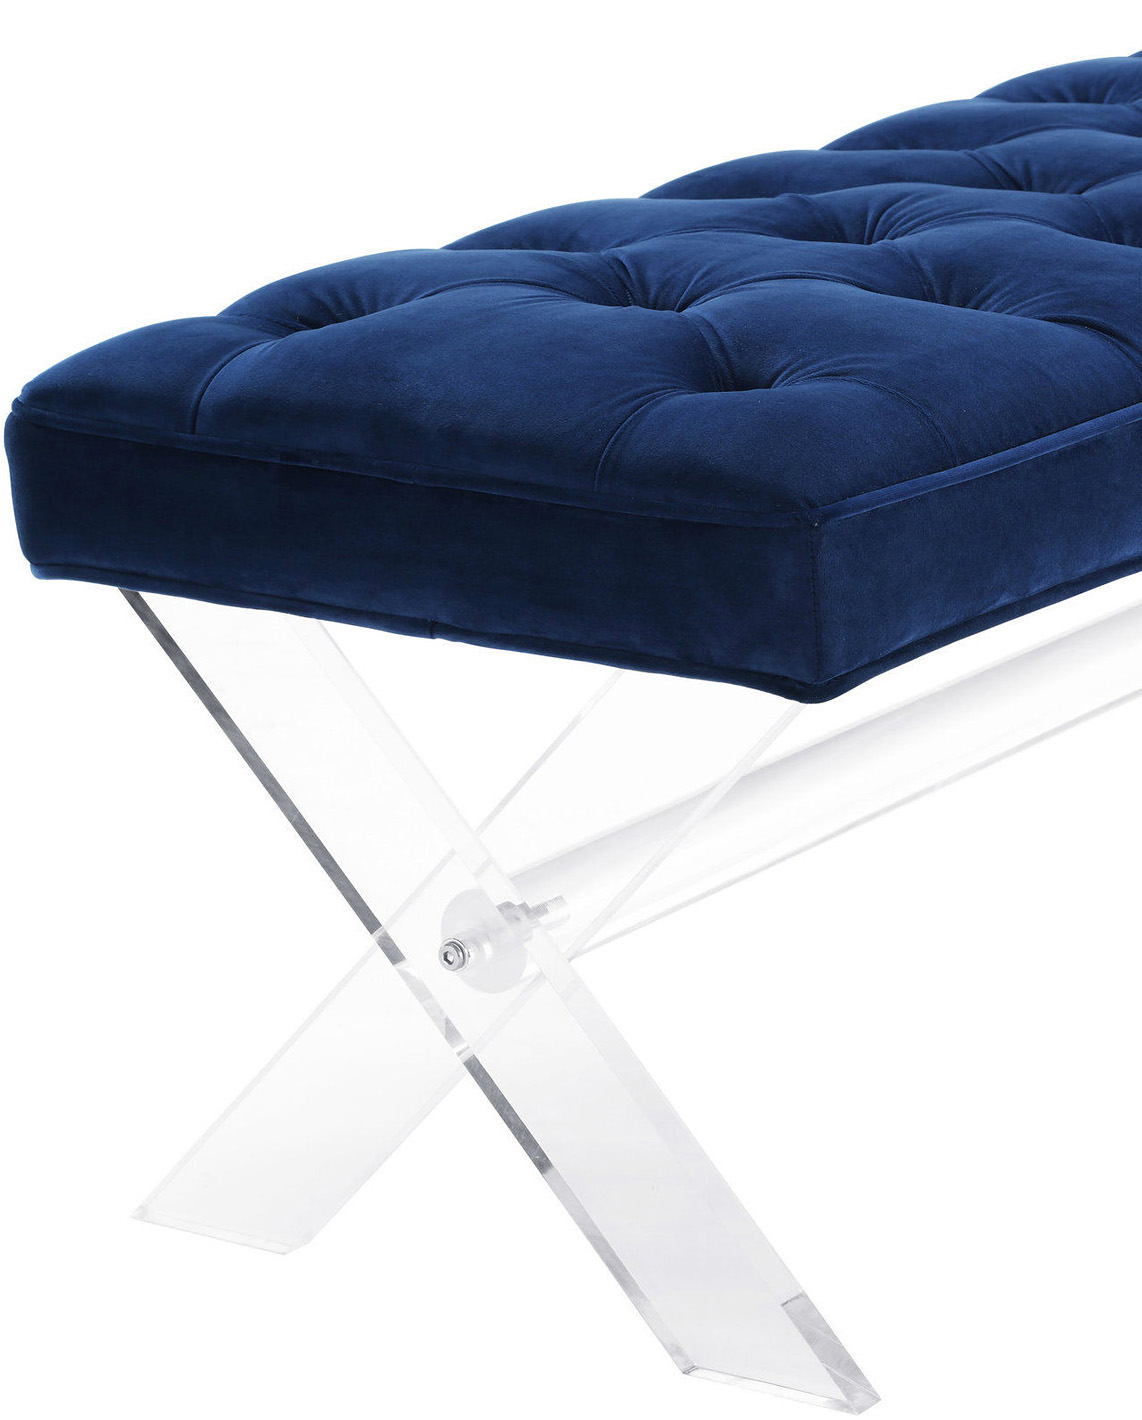 the claudia bench in navy